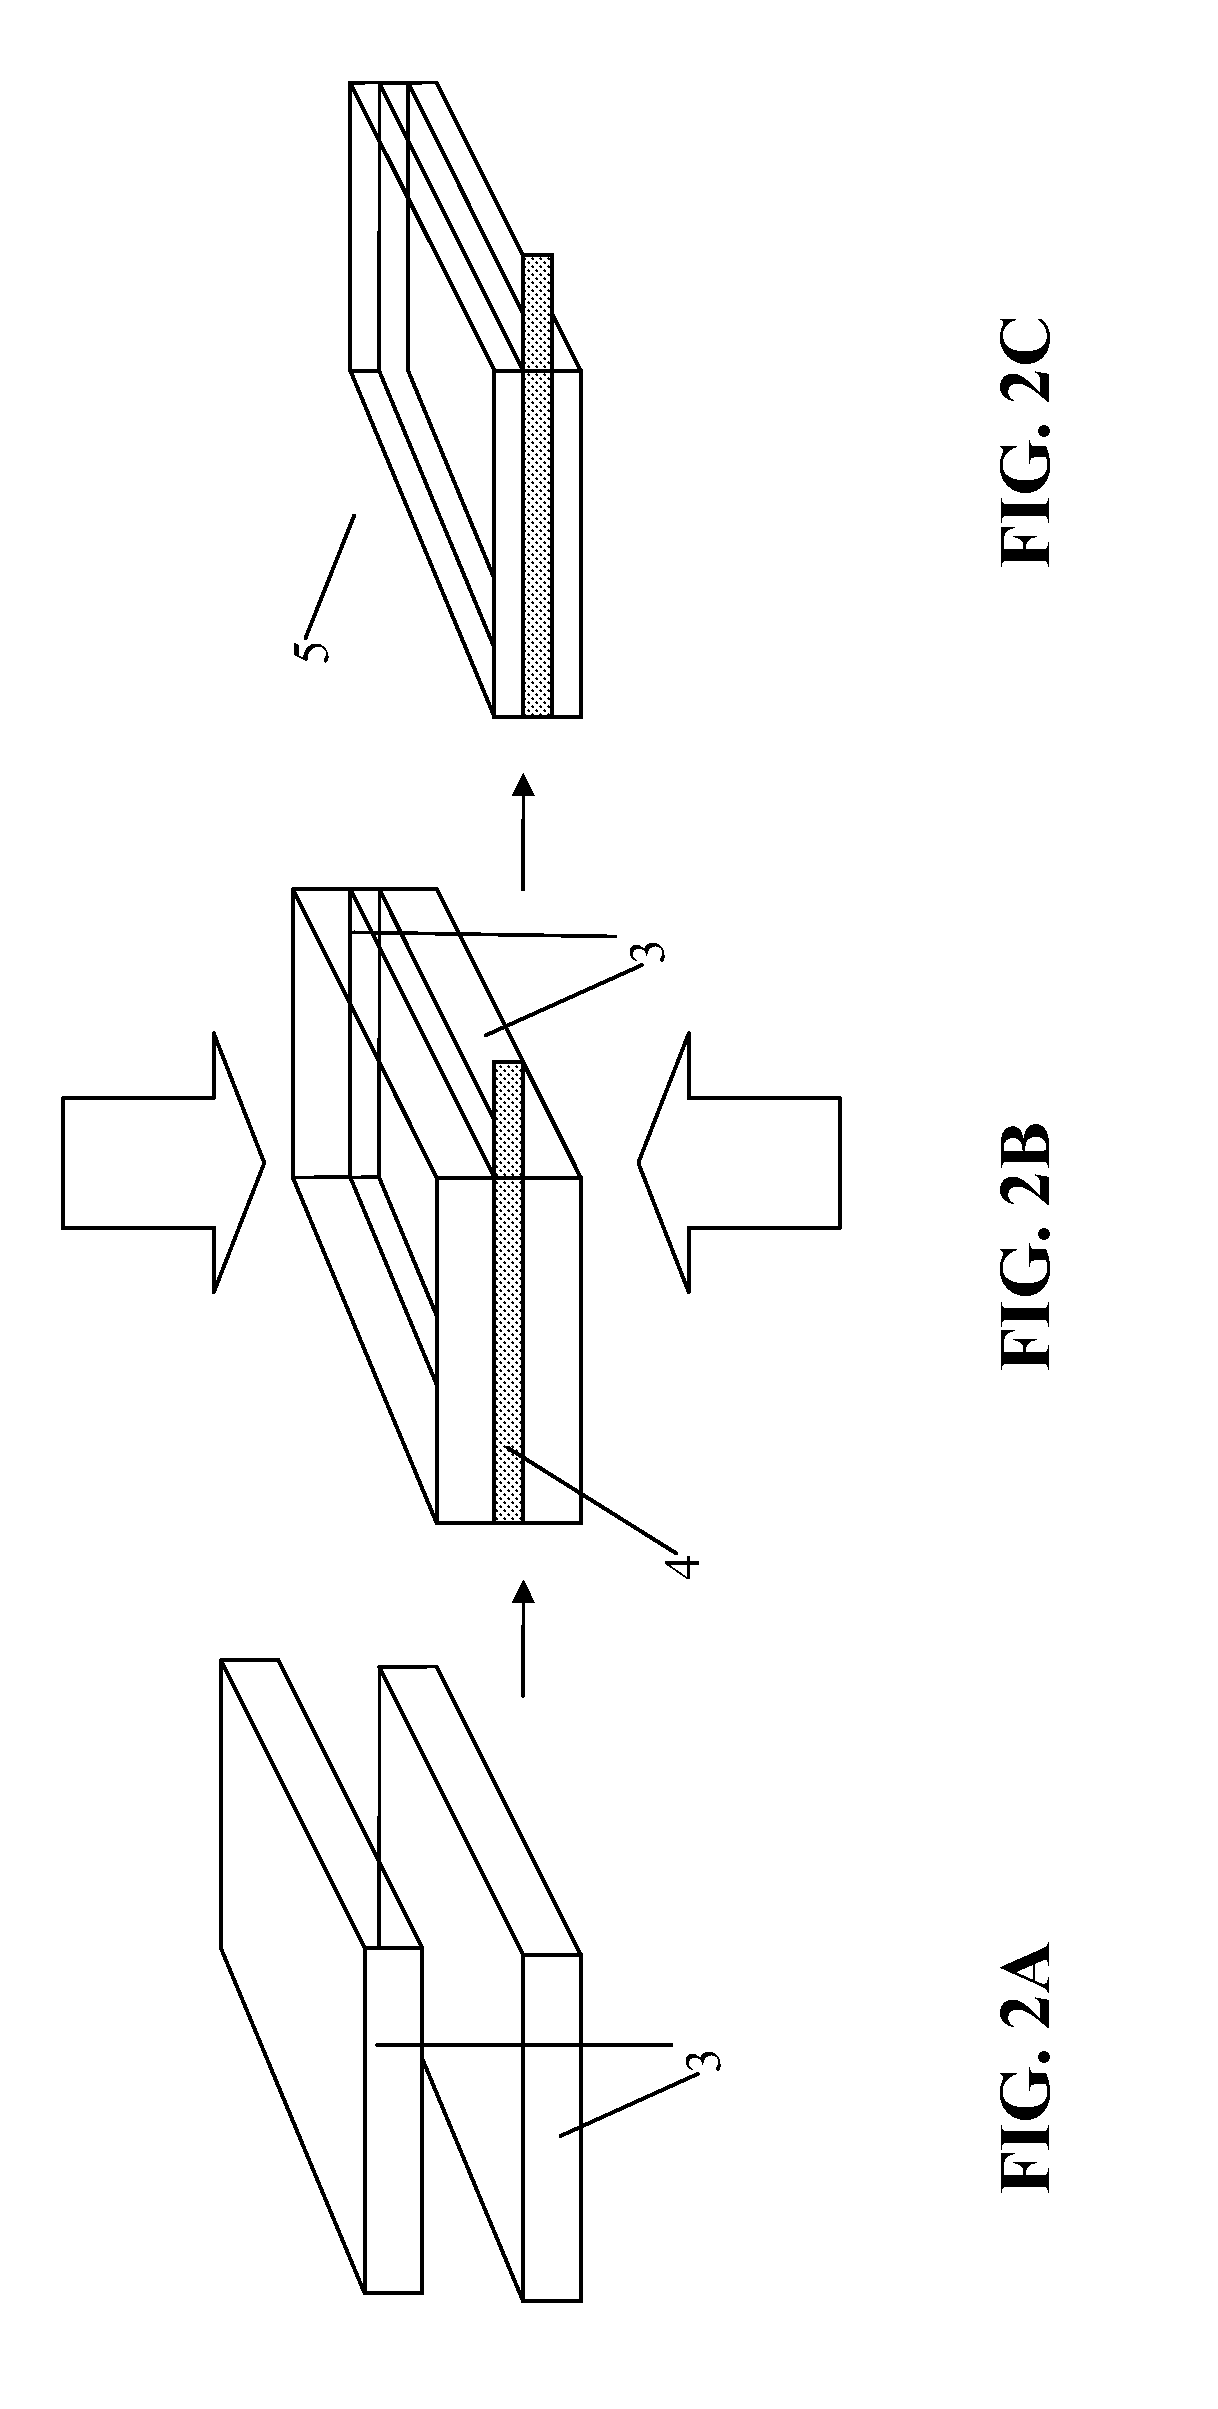 Powder mixture for manufacture of a battery electrode, a respective battery electrode and a method for manufacturing same